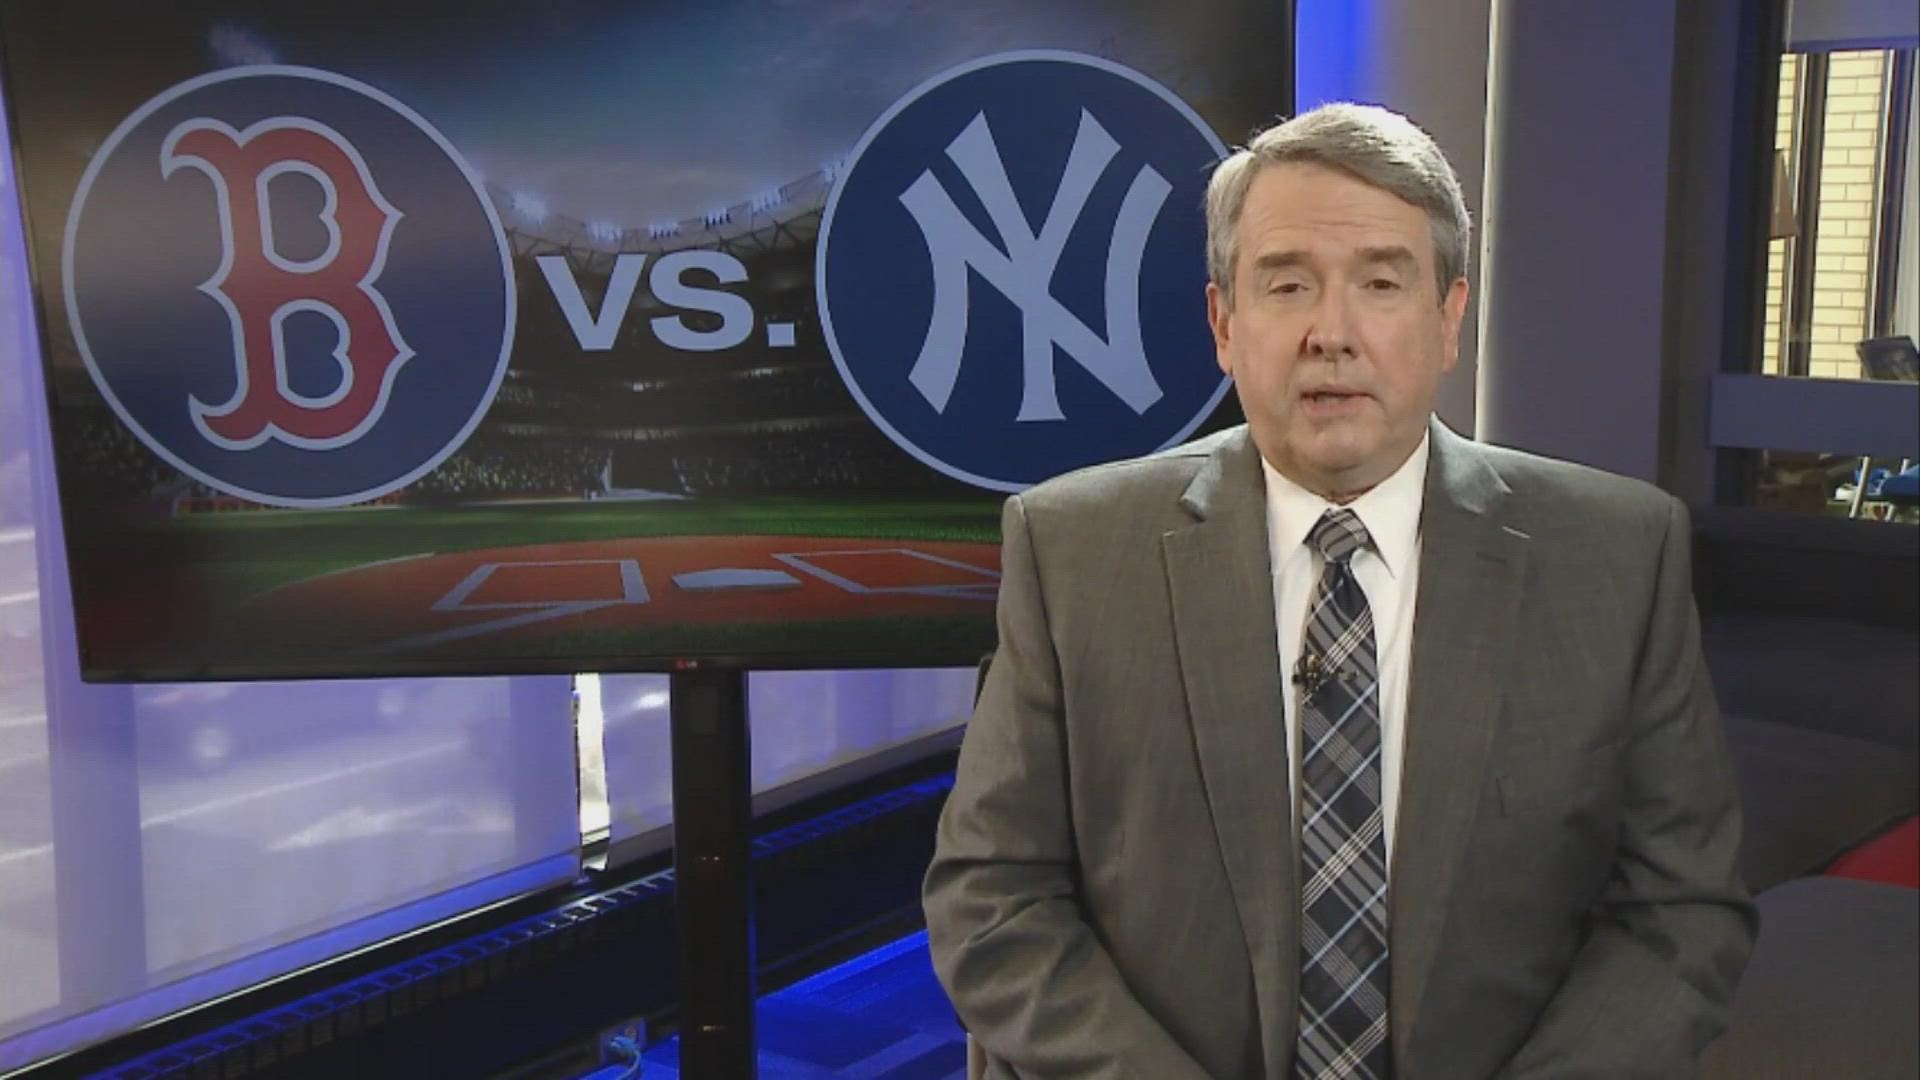 It's win or go home time for the Red Sox. NESN's Tom Caron chats with Pat Callaghan about the showdown against the Yankees.